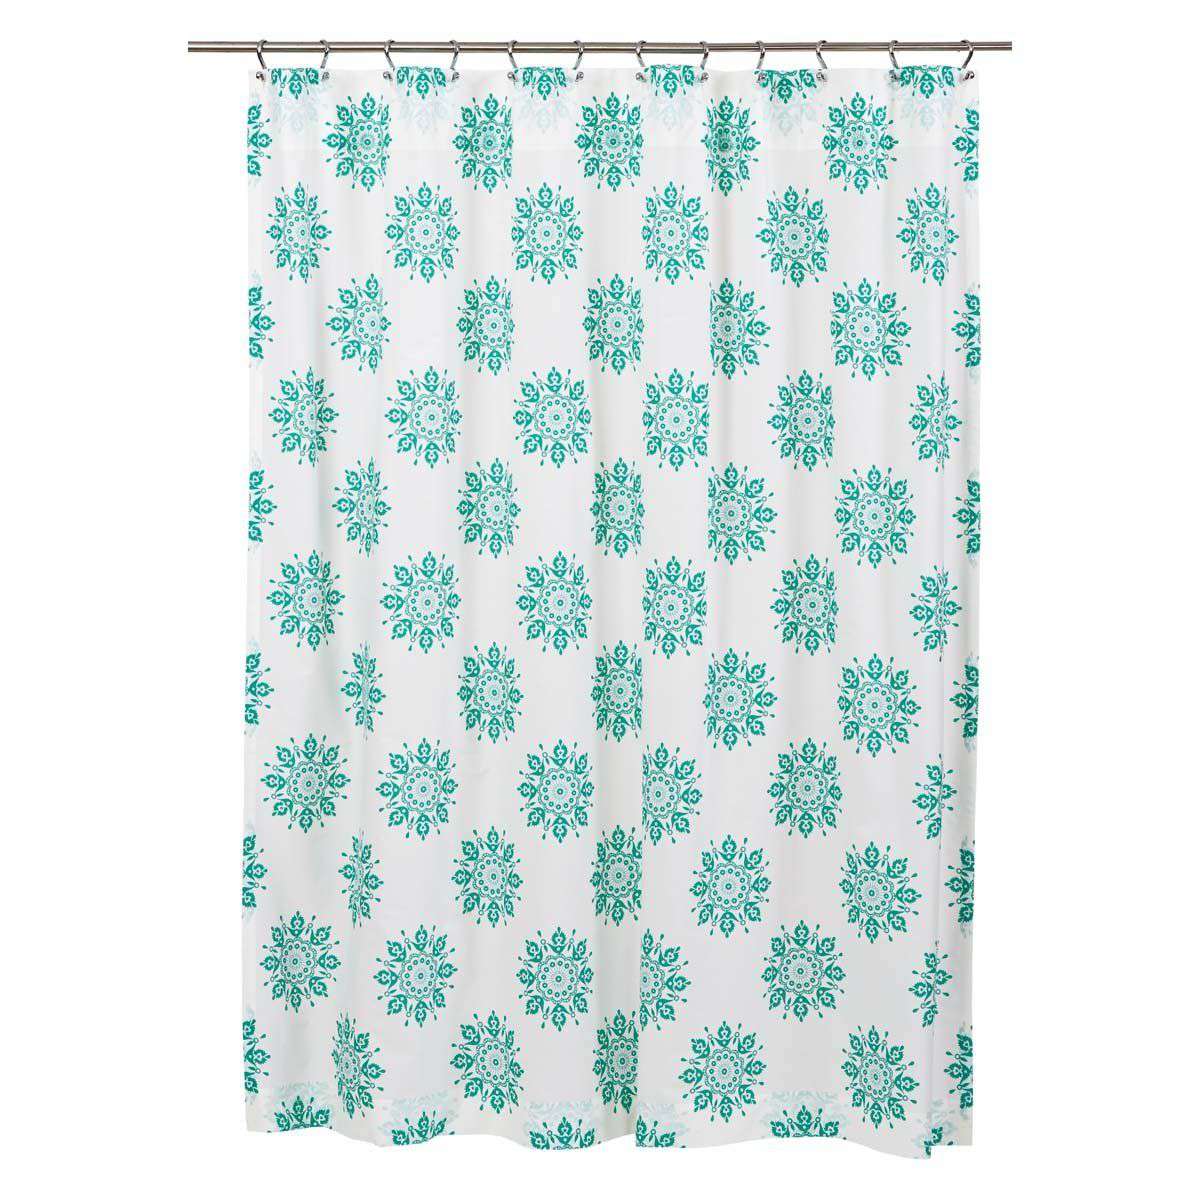 Mariposa Turquoise Shower Curtain 72"x72" curtain VHC Brands 